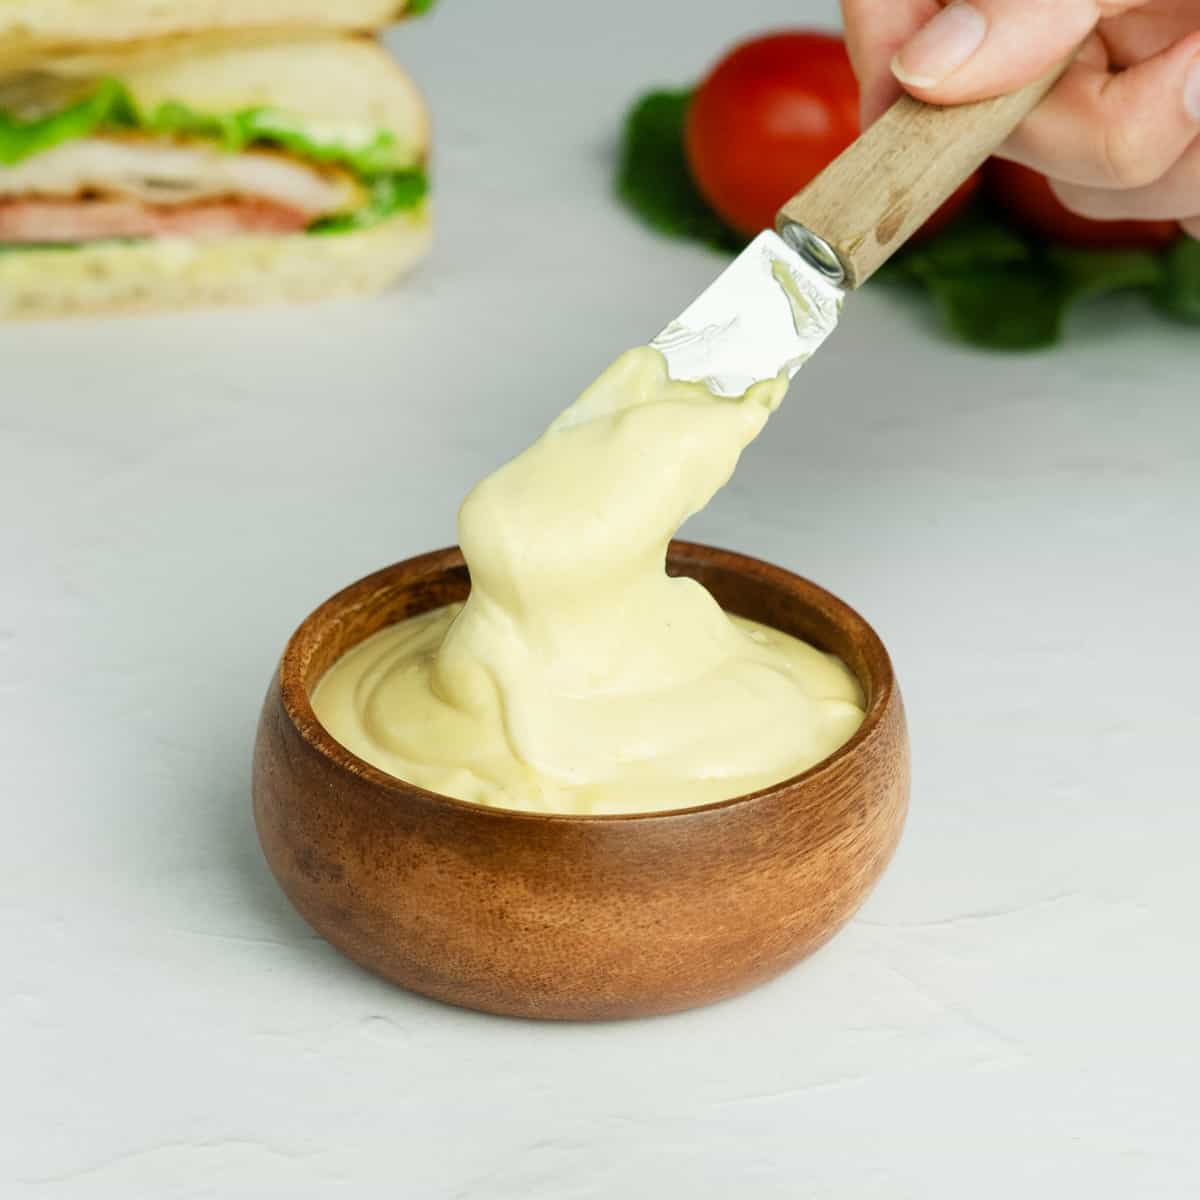 mayo mustard sauce in a small wooden bowl